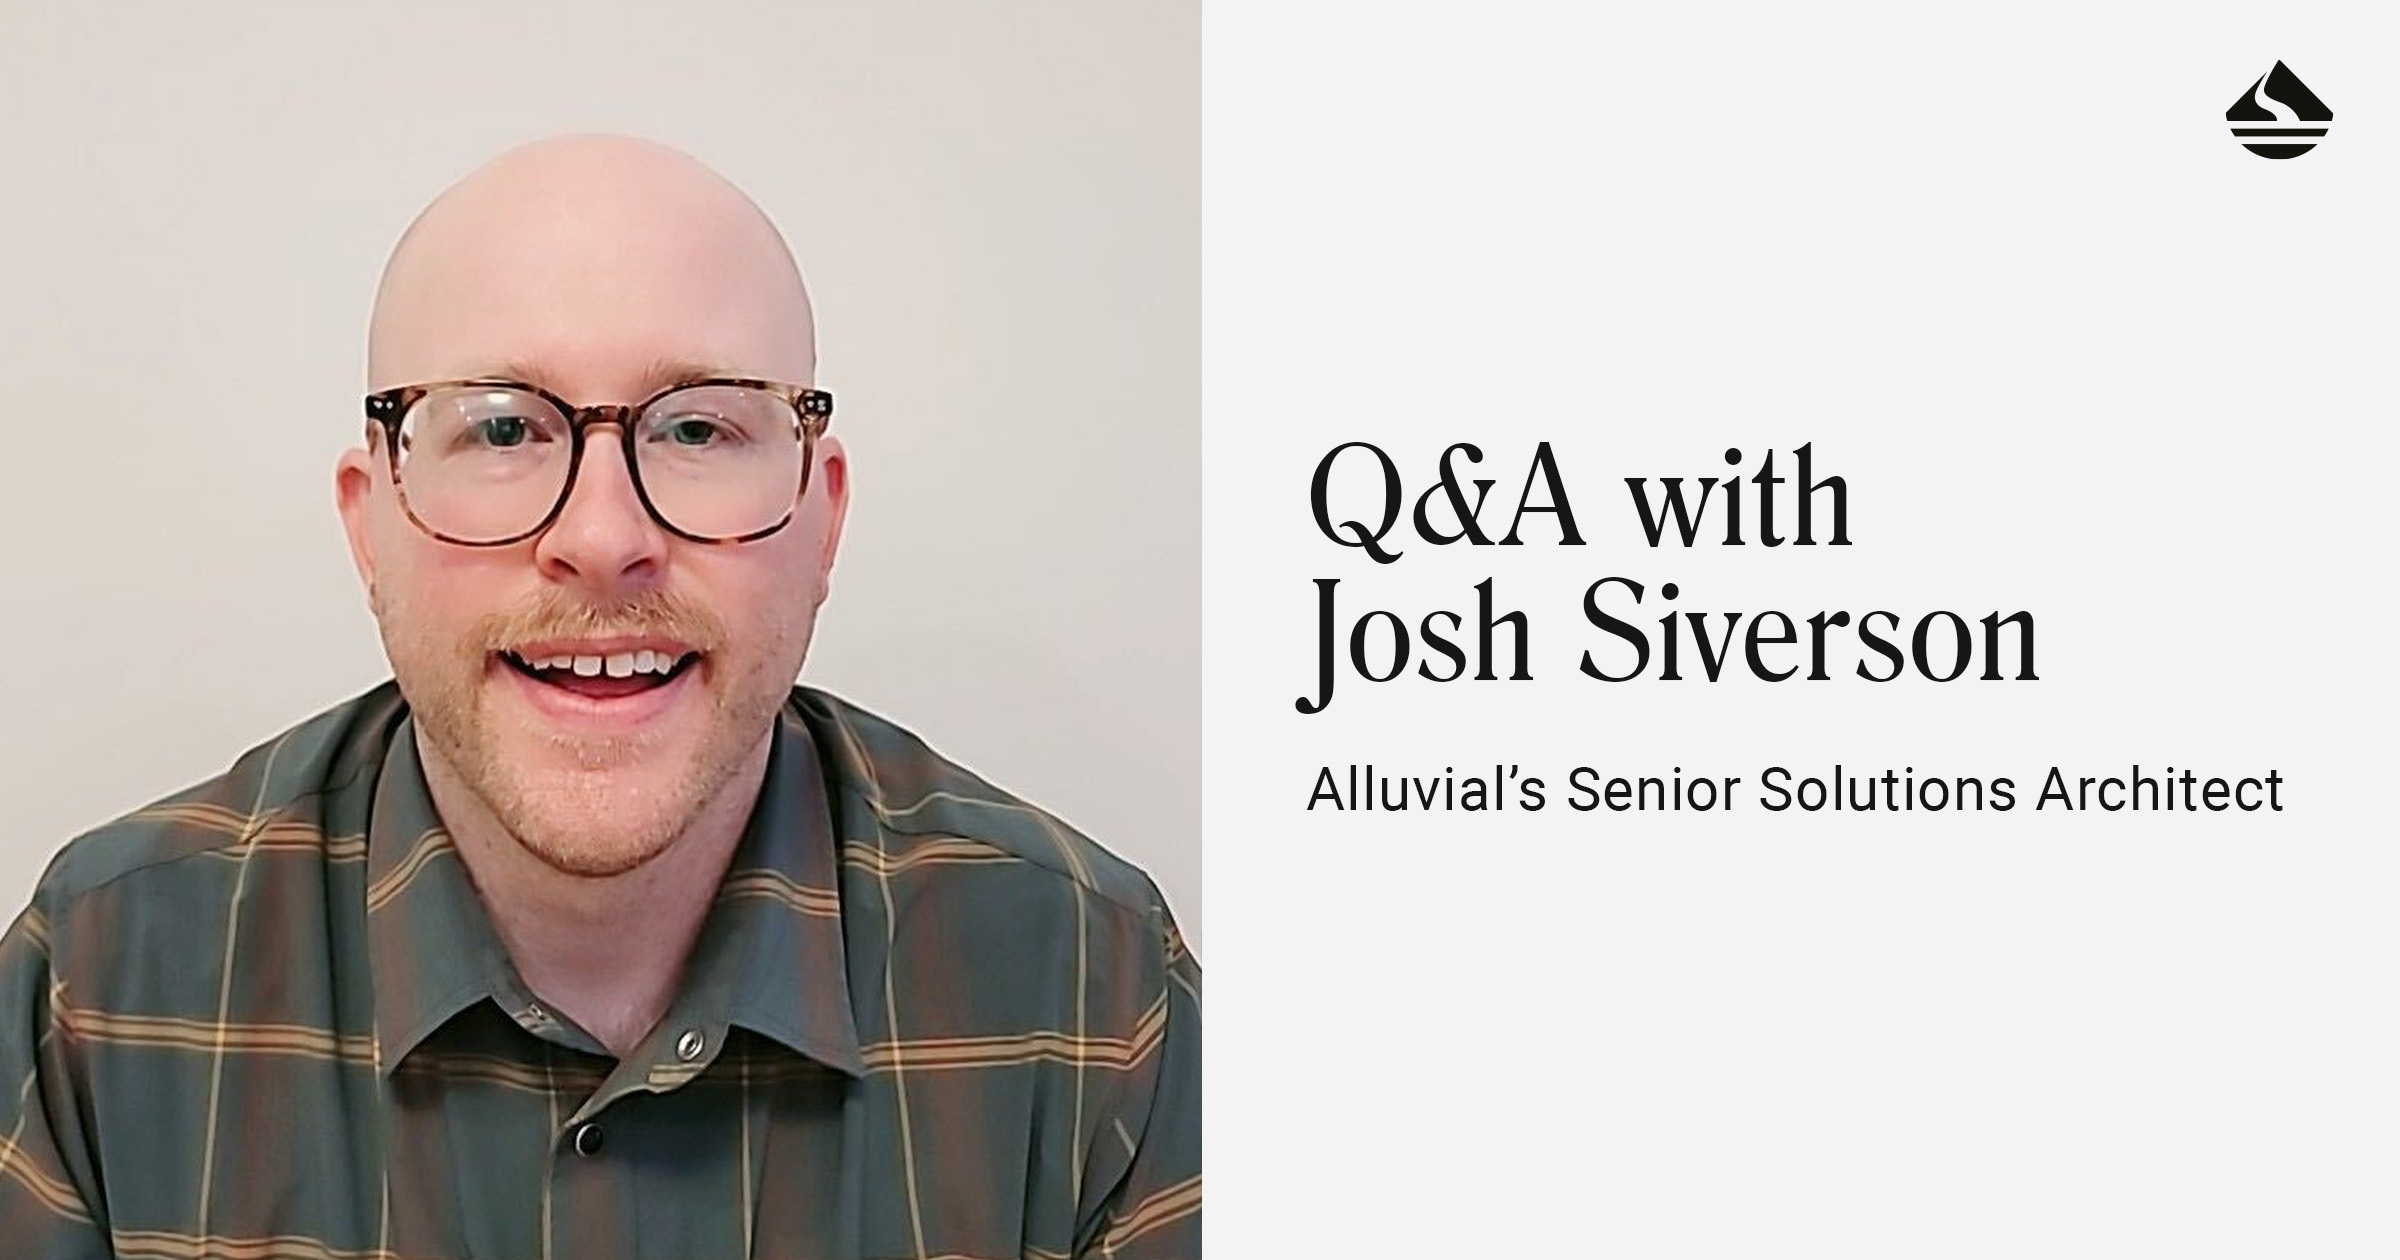 Q&A with with Josh Siverson, Alluvial